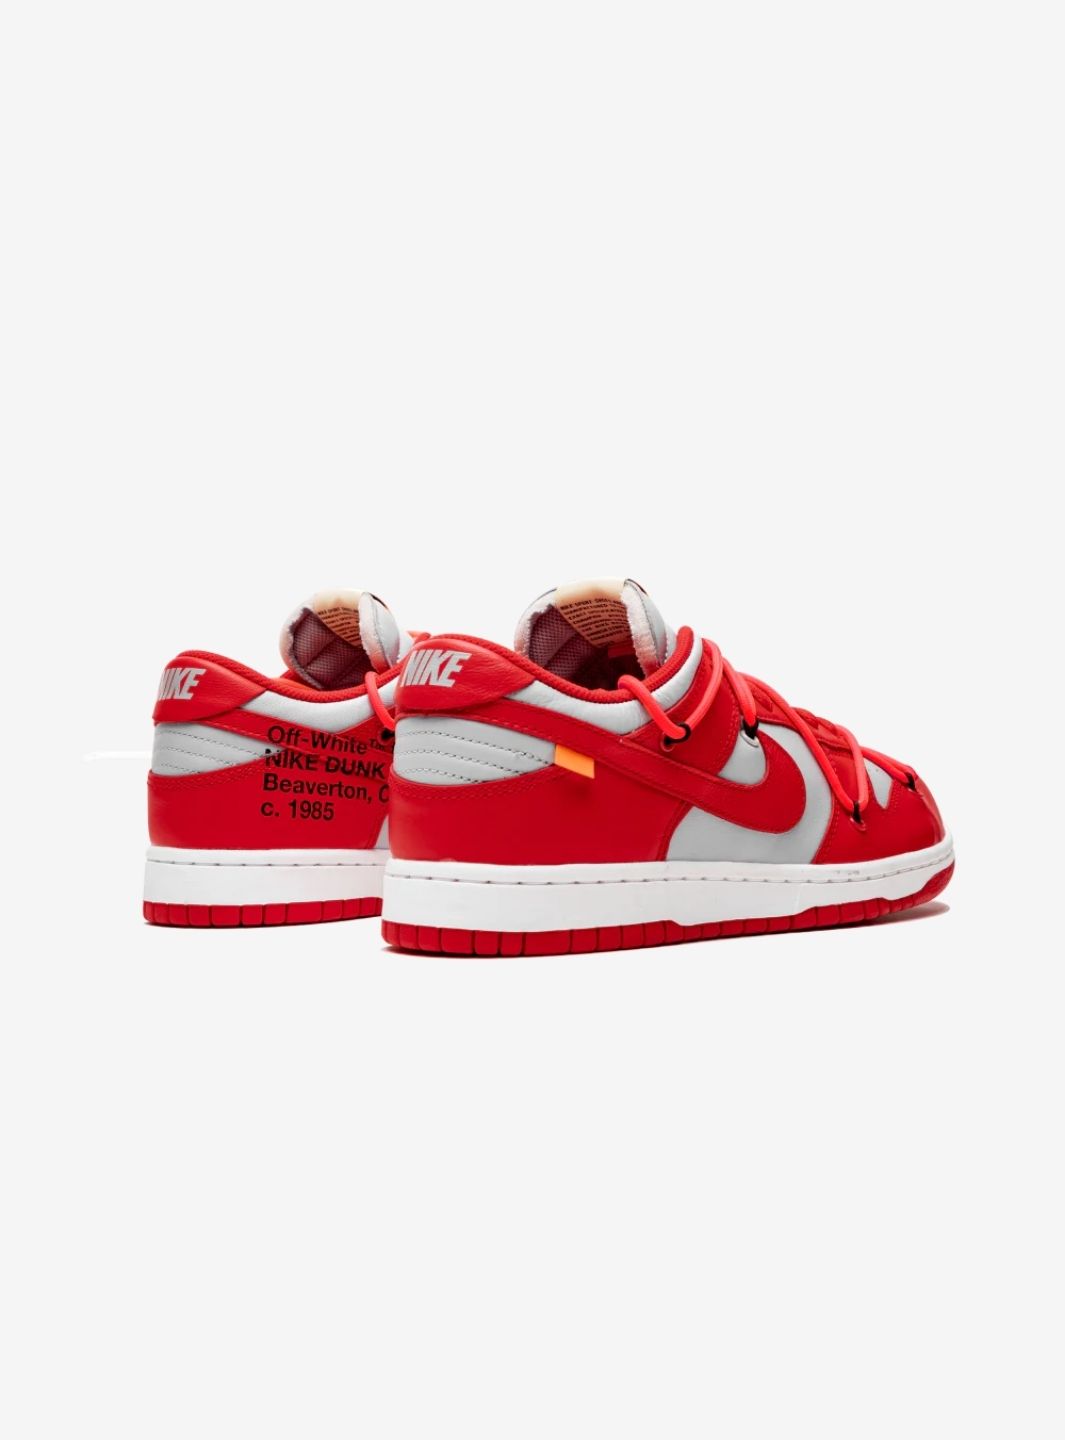 Nike Dunk Low Off-White University Red - CT0856-600 | ResellZone